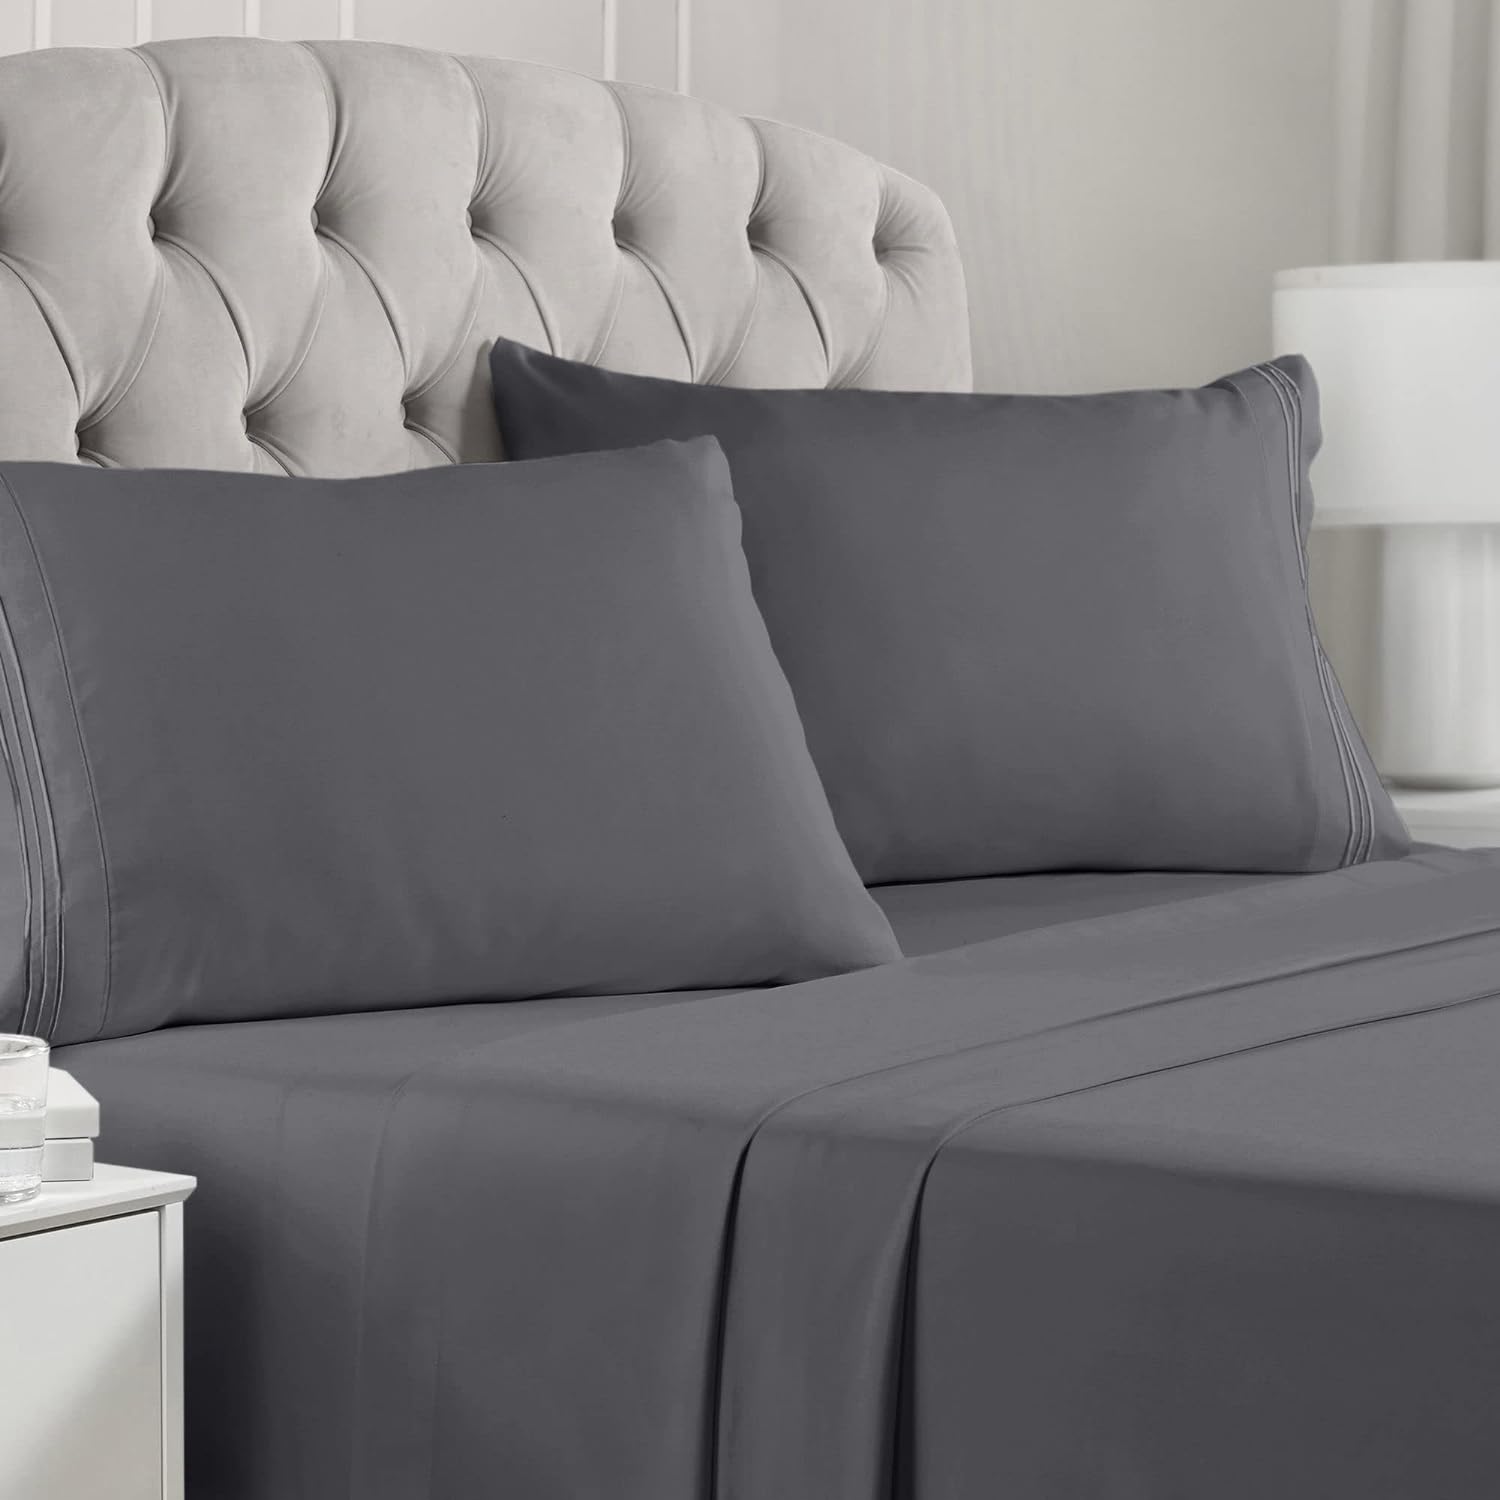 Mellanni Queen Sheets Set - 4 PC Iconic Collection Bedding Sheets & Pillowcases - Hotel Luxury, Extra Soft, Cooling Bed Sheets - Deep Pocket up to 16 - Wrinkle, Fade, Stain Resistant (Queen, Gray) 